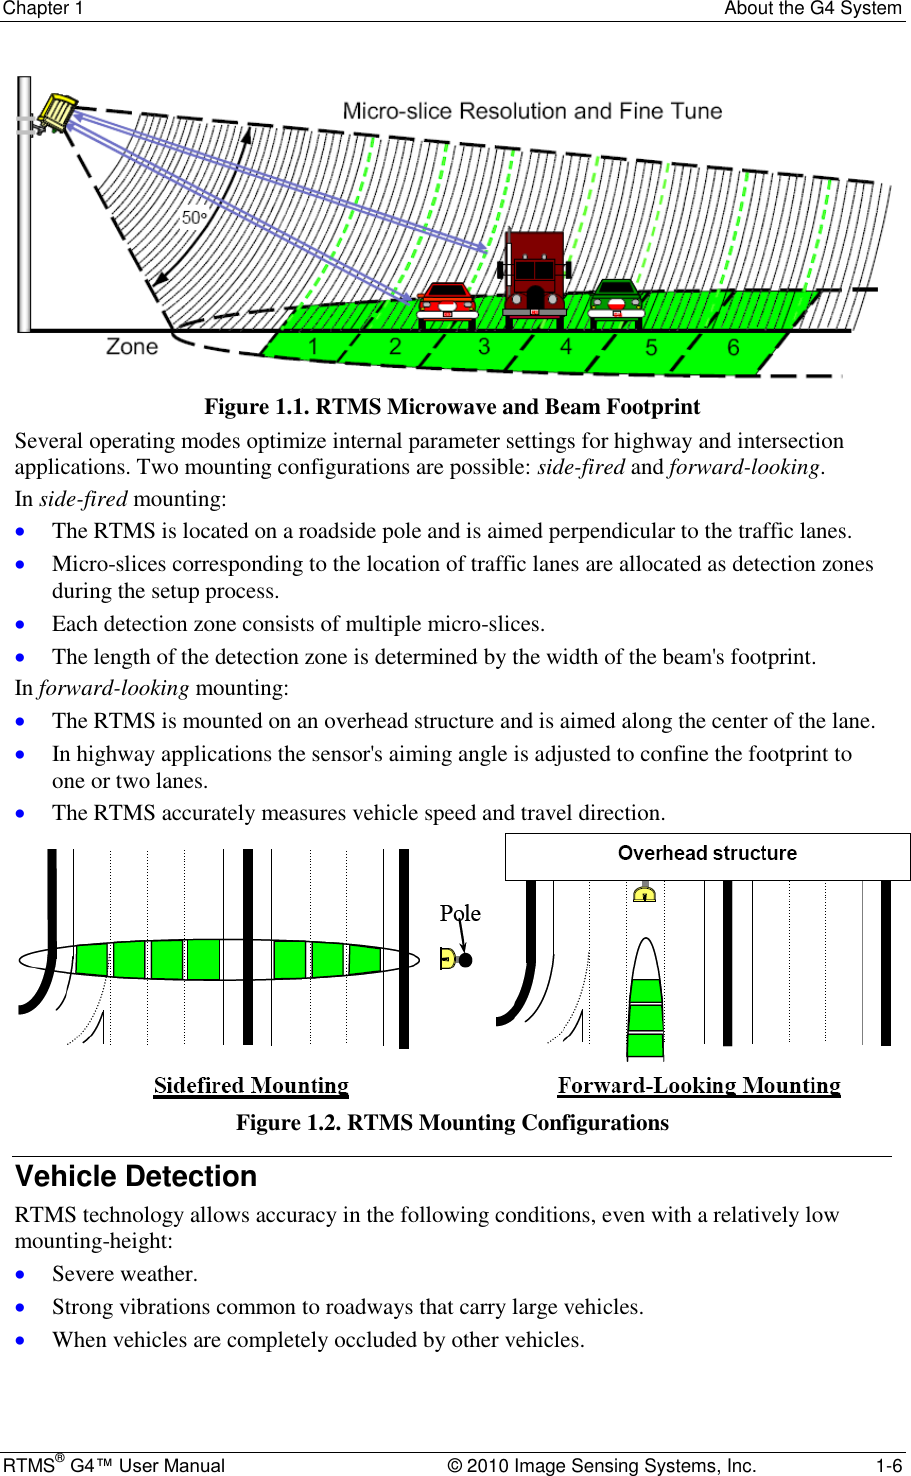 Chapter 1  About the G4 System RTMS® G4™ User Manual  © 2010 Image Sensing Systems, Inc.  1-6  Figure 1.1. RTMS Microwave and Beam Footprint Several operating modes optimize internal parameter settings for highway and intersection applications. Two mounting configurations are possible: side-fired and forward-looking.  In side-fired mounting:  The RTMS is located on a roadside pole and is aimed perpendicular to the traffic lanes.  Micro-slices corresponding to the location of traffic lanes are allocated as detection zones during the setup process.  Each detection zone consists of multiple micro-slices.  The length of the detection zone is determined by the width of the beam&apos;s footprint. In forward-looking mounting:  The RTMS is mounted on an overhead structure and is aimed along the center of the lane.  In highway applications the sensor&apos;s aiming angle is adjusted to confine the footprint to one or two lanes.  The RTMS accurately measures vehicle speed and travel direction.  Figure 1.2. RTMS Mounting Configurations Vehicle Detection RTMS technology allows accuracy in the following conditions, even with a relatively low mounting-height:  Severe weather.  Strong vibrations common to roadways that carry large vehicles.  When vehicles are completely occluded by other vehicles.  